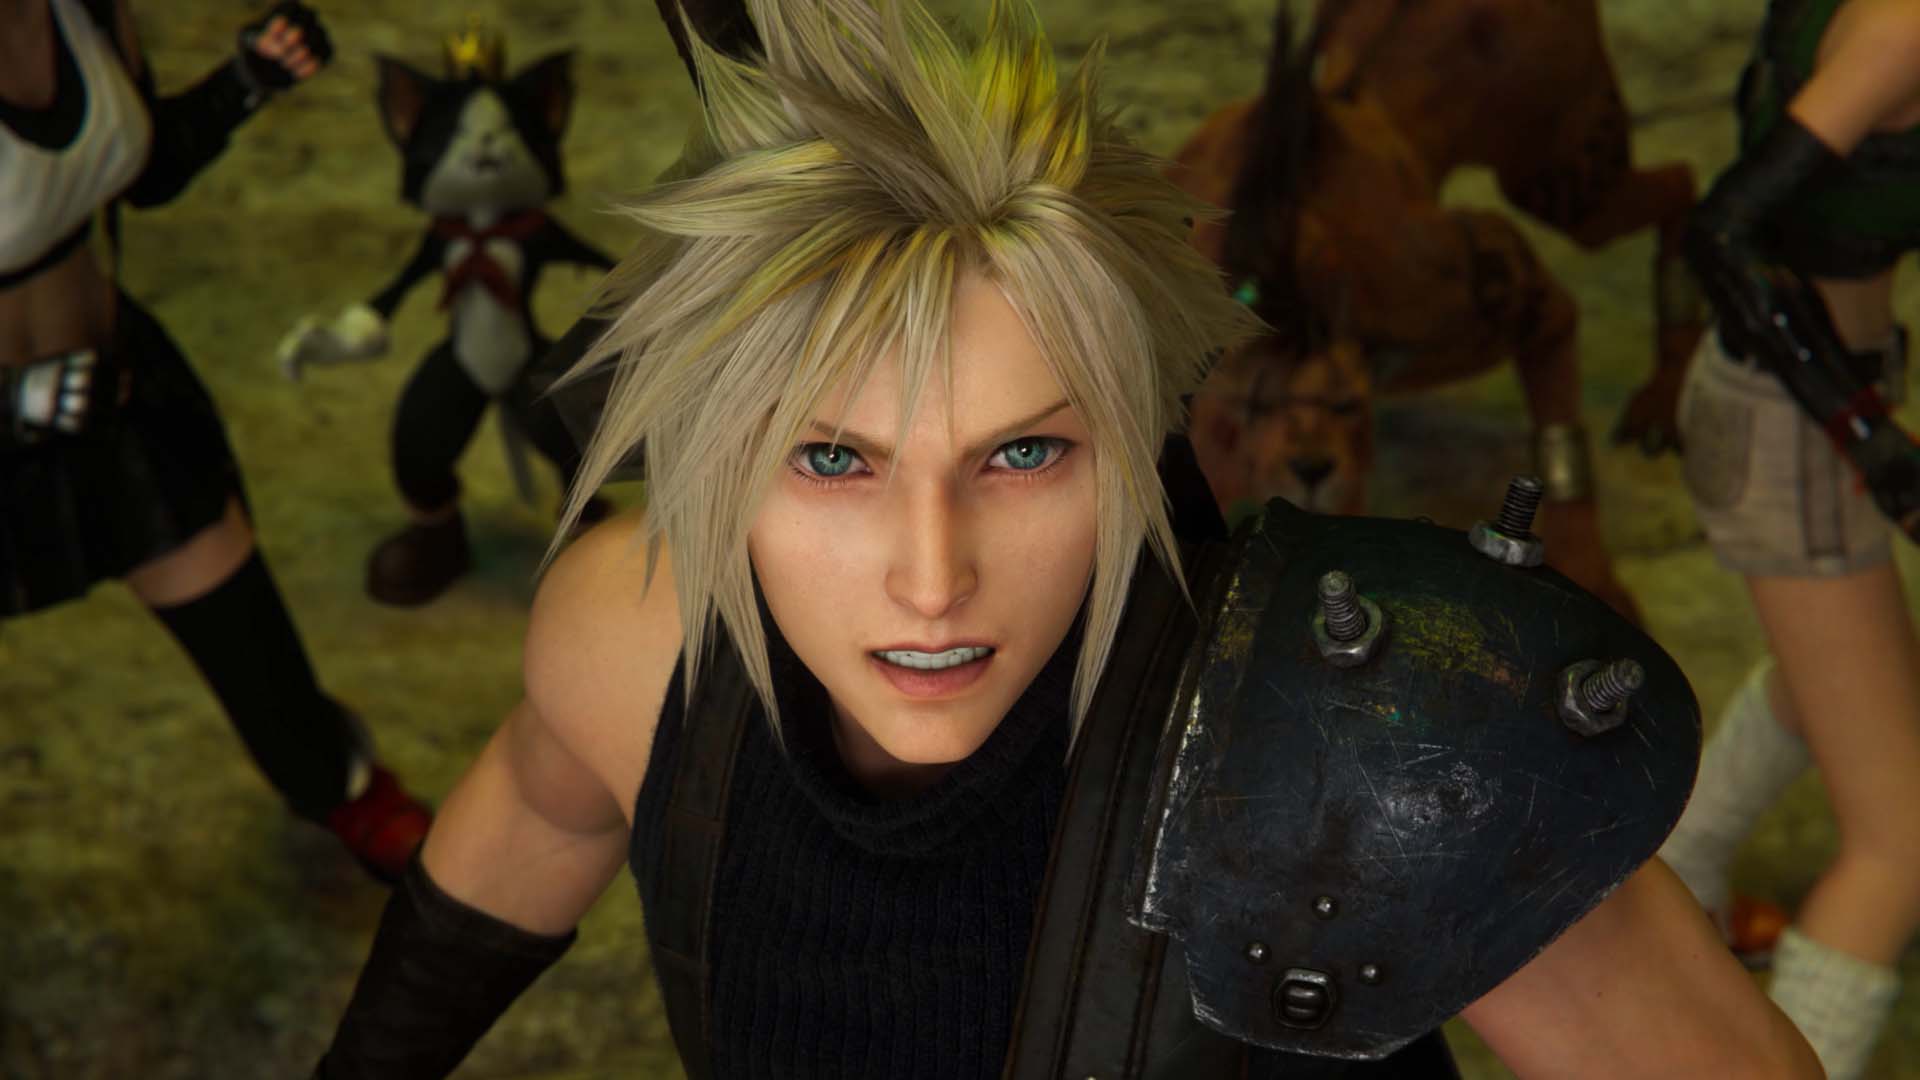 Final Fantasy 7 Rebirth release date, gameplay and trailers